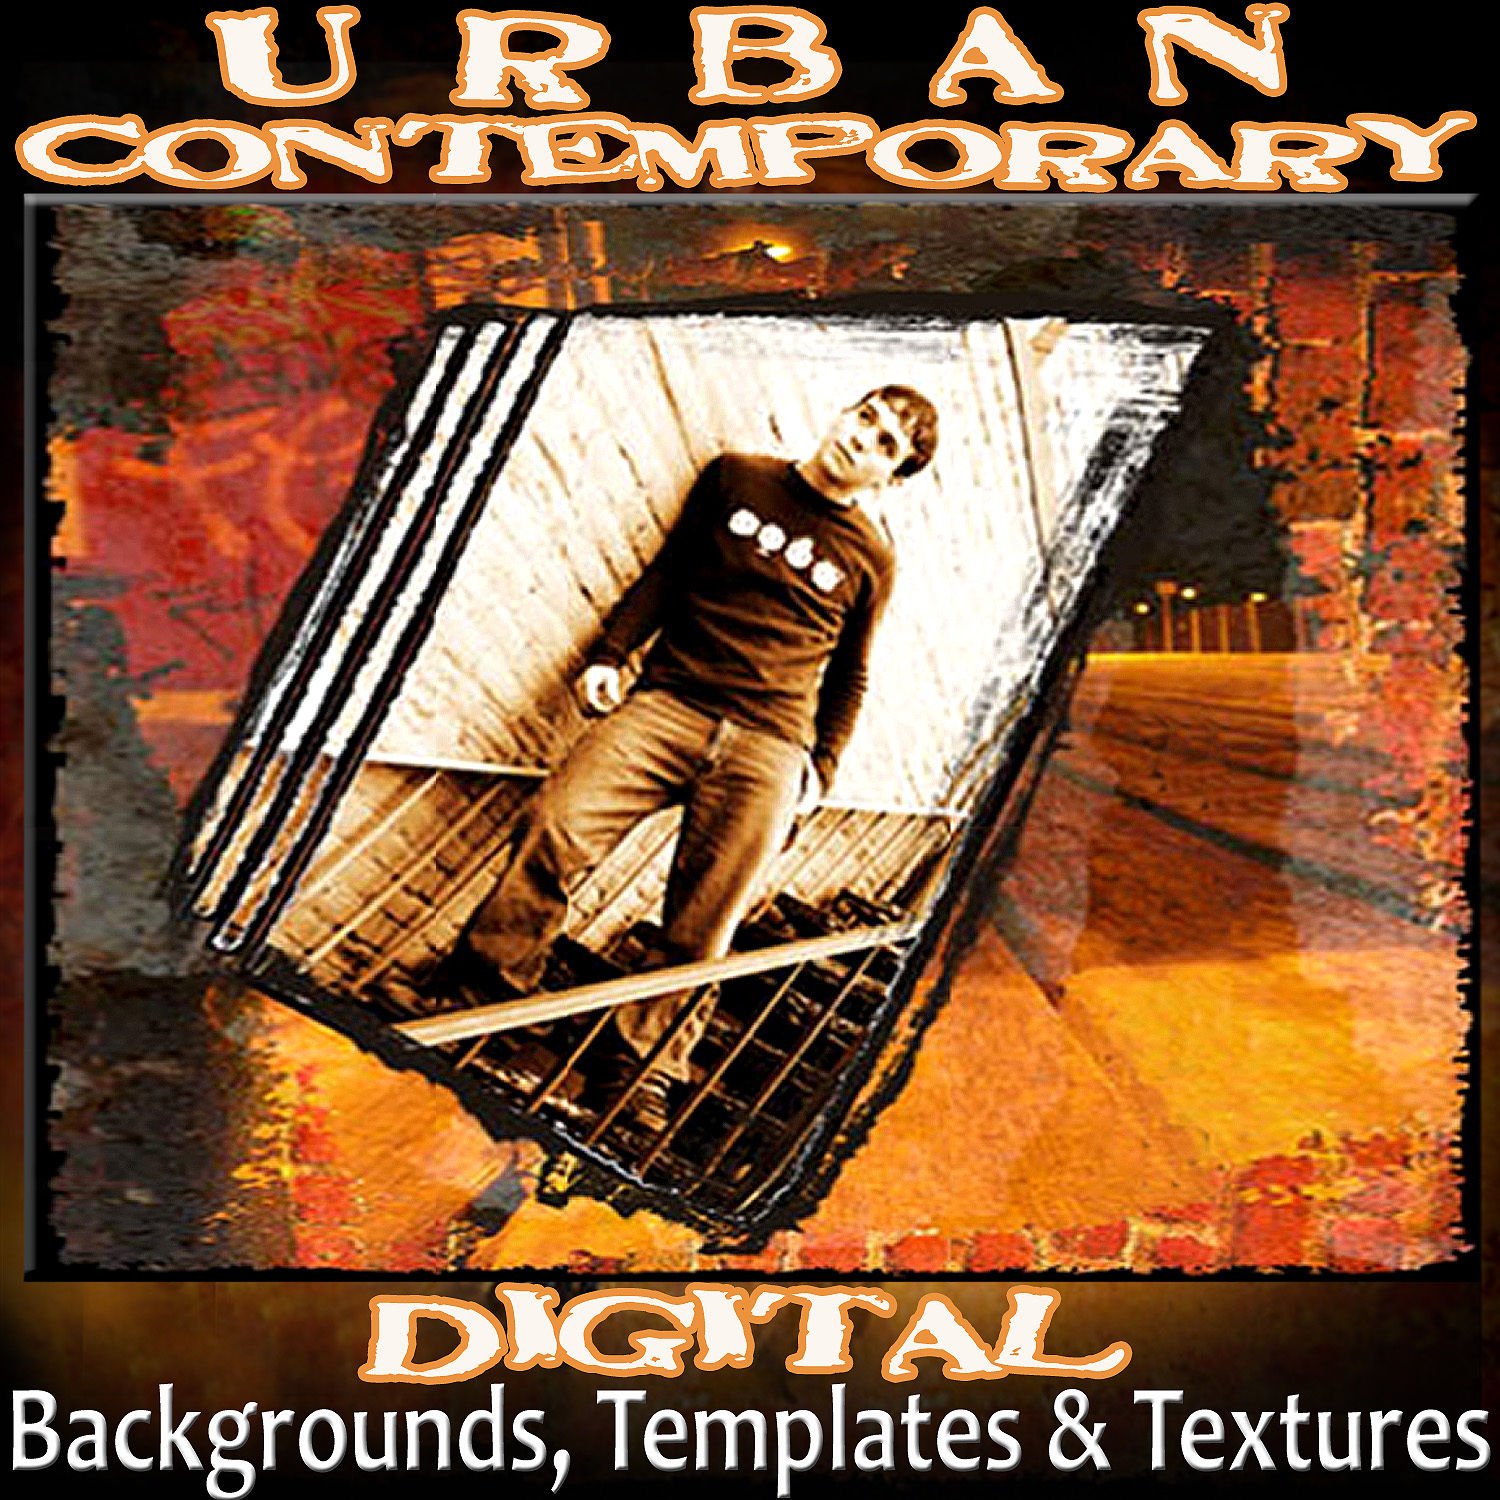 Edgy Urban Photoshop Backdrops, Hot Photo Backgrounds & Templates w - Digital  Backgrounds & Photography Courses The Photo Coach